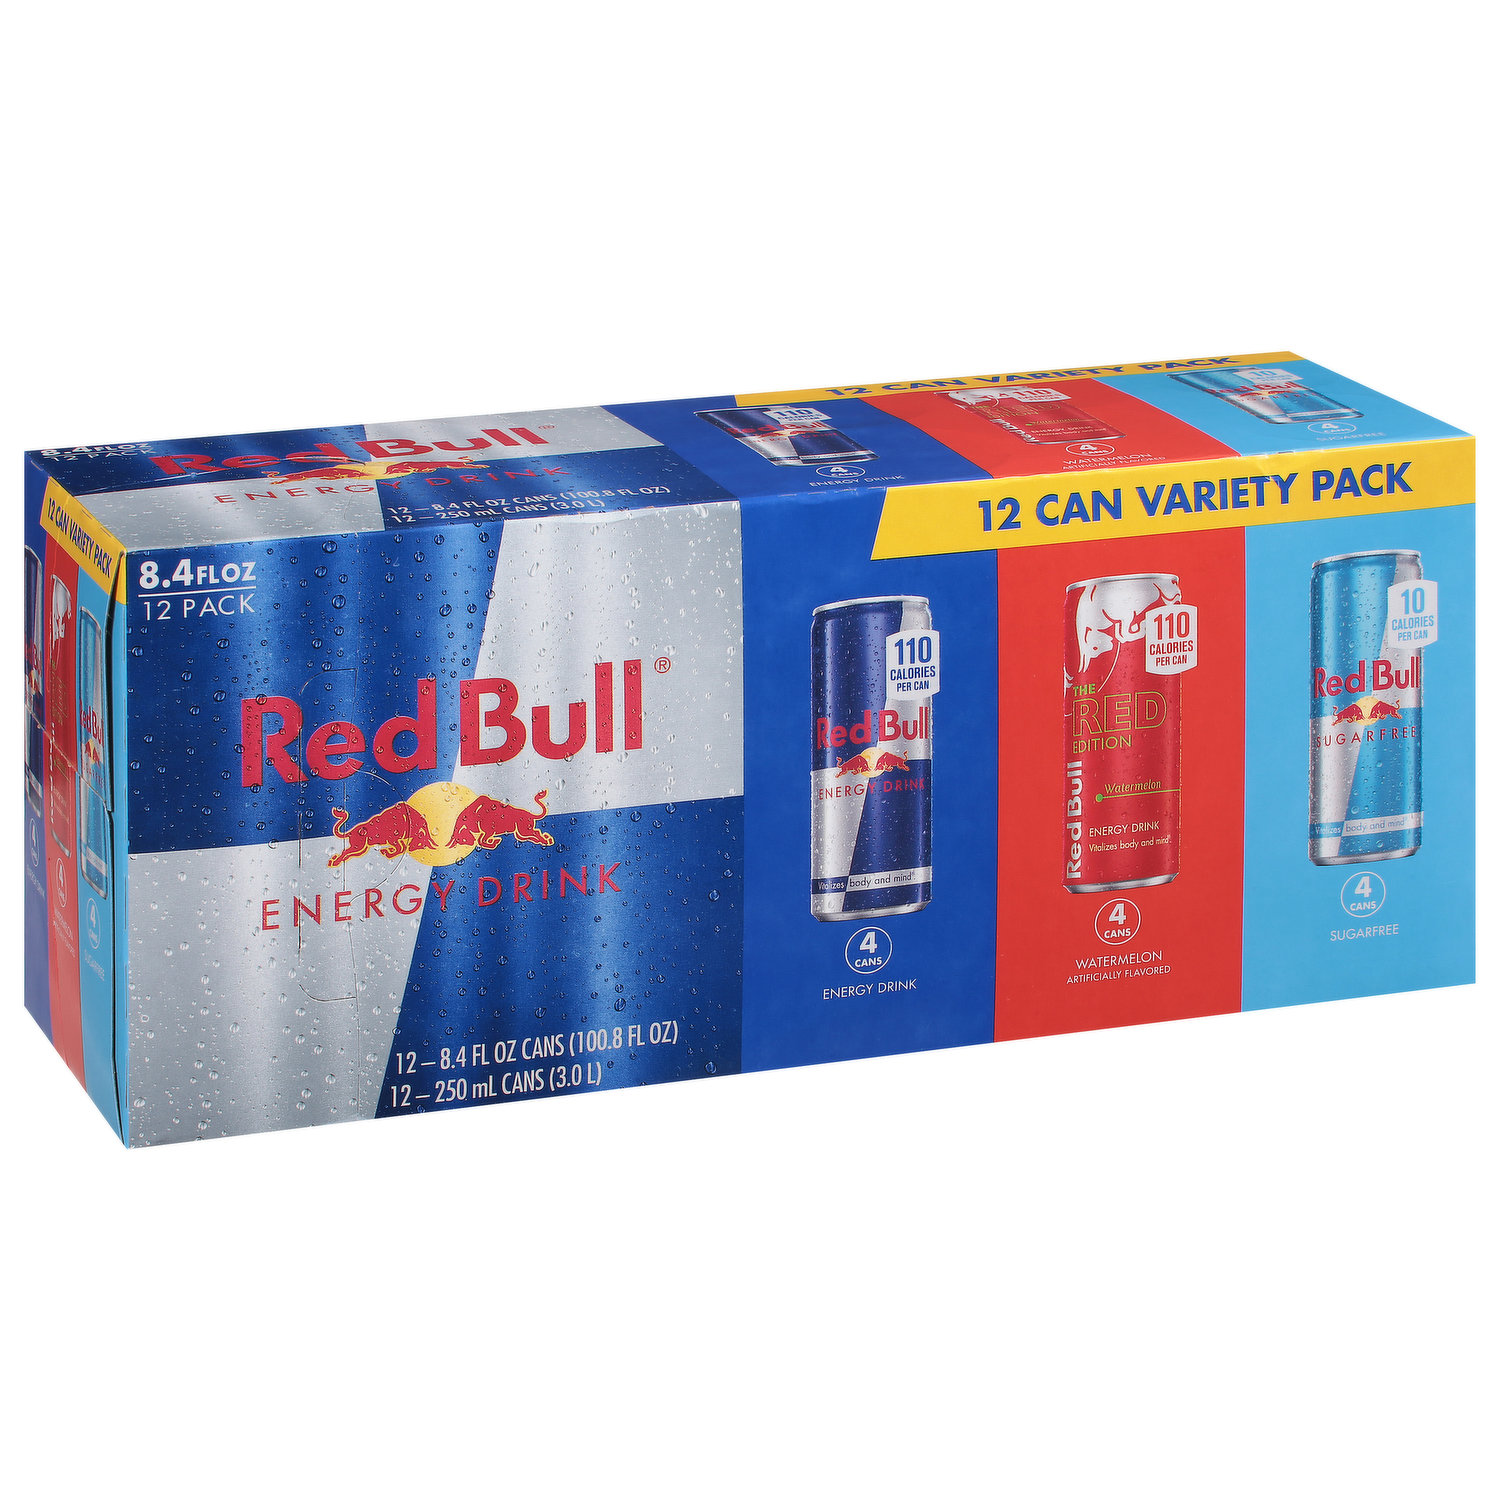 Red Bull Home Appliances